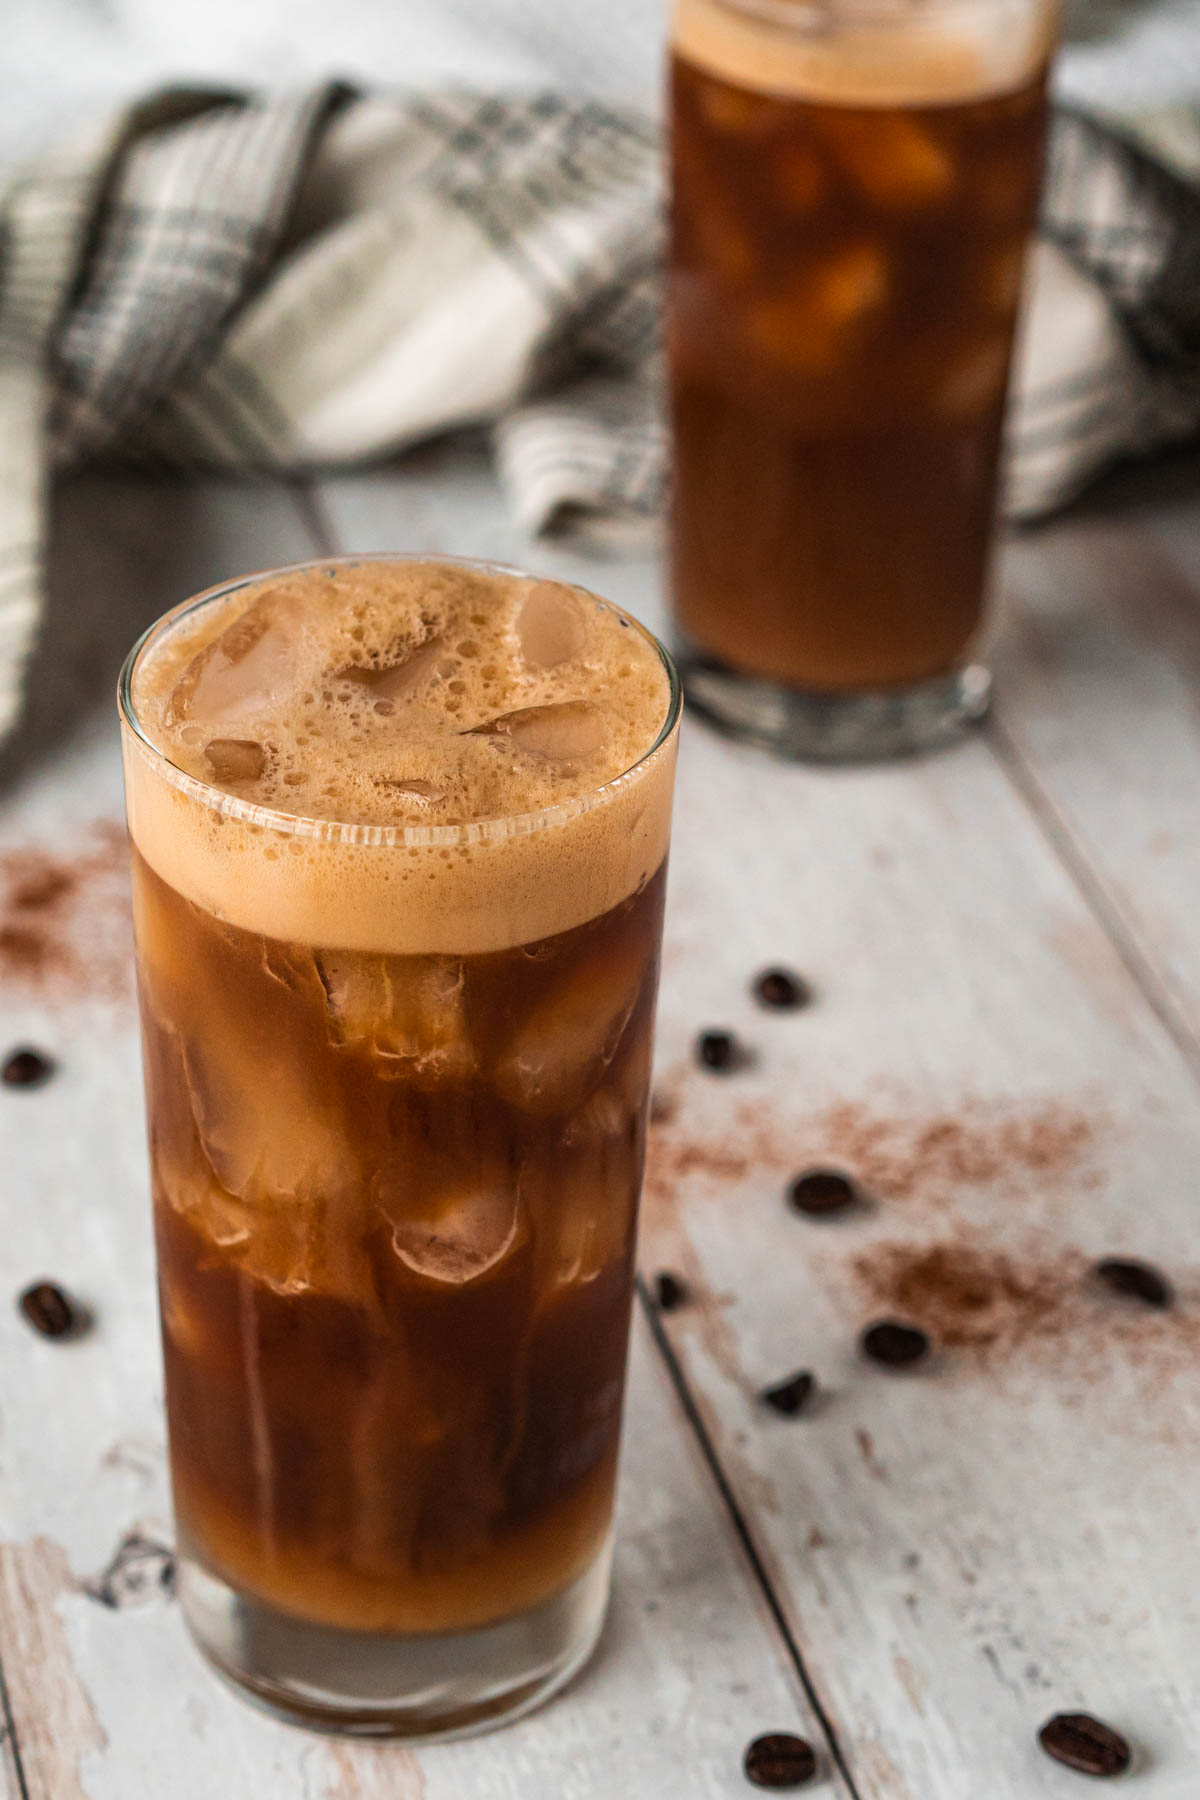 Closeup shot of a tall glass filled with iced coffee with foam on top and cream cascading down the side of the glass. Another glass of iced coffee is blurred in the background.